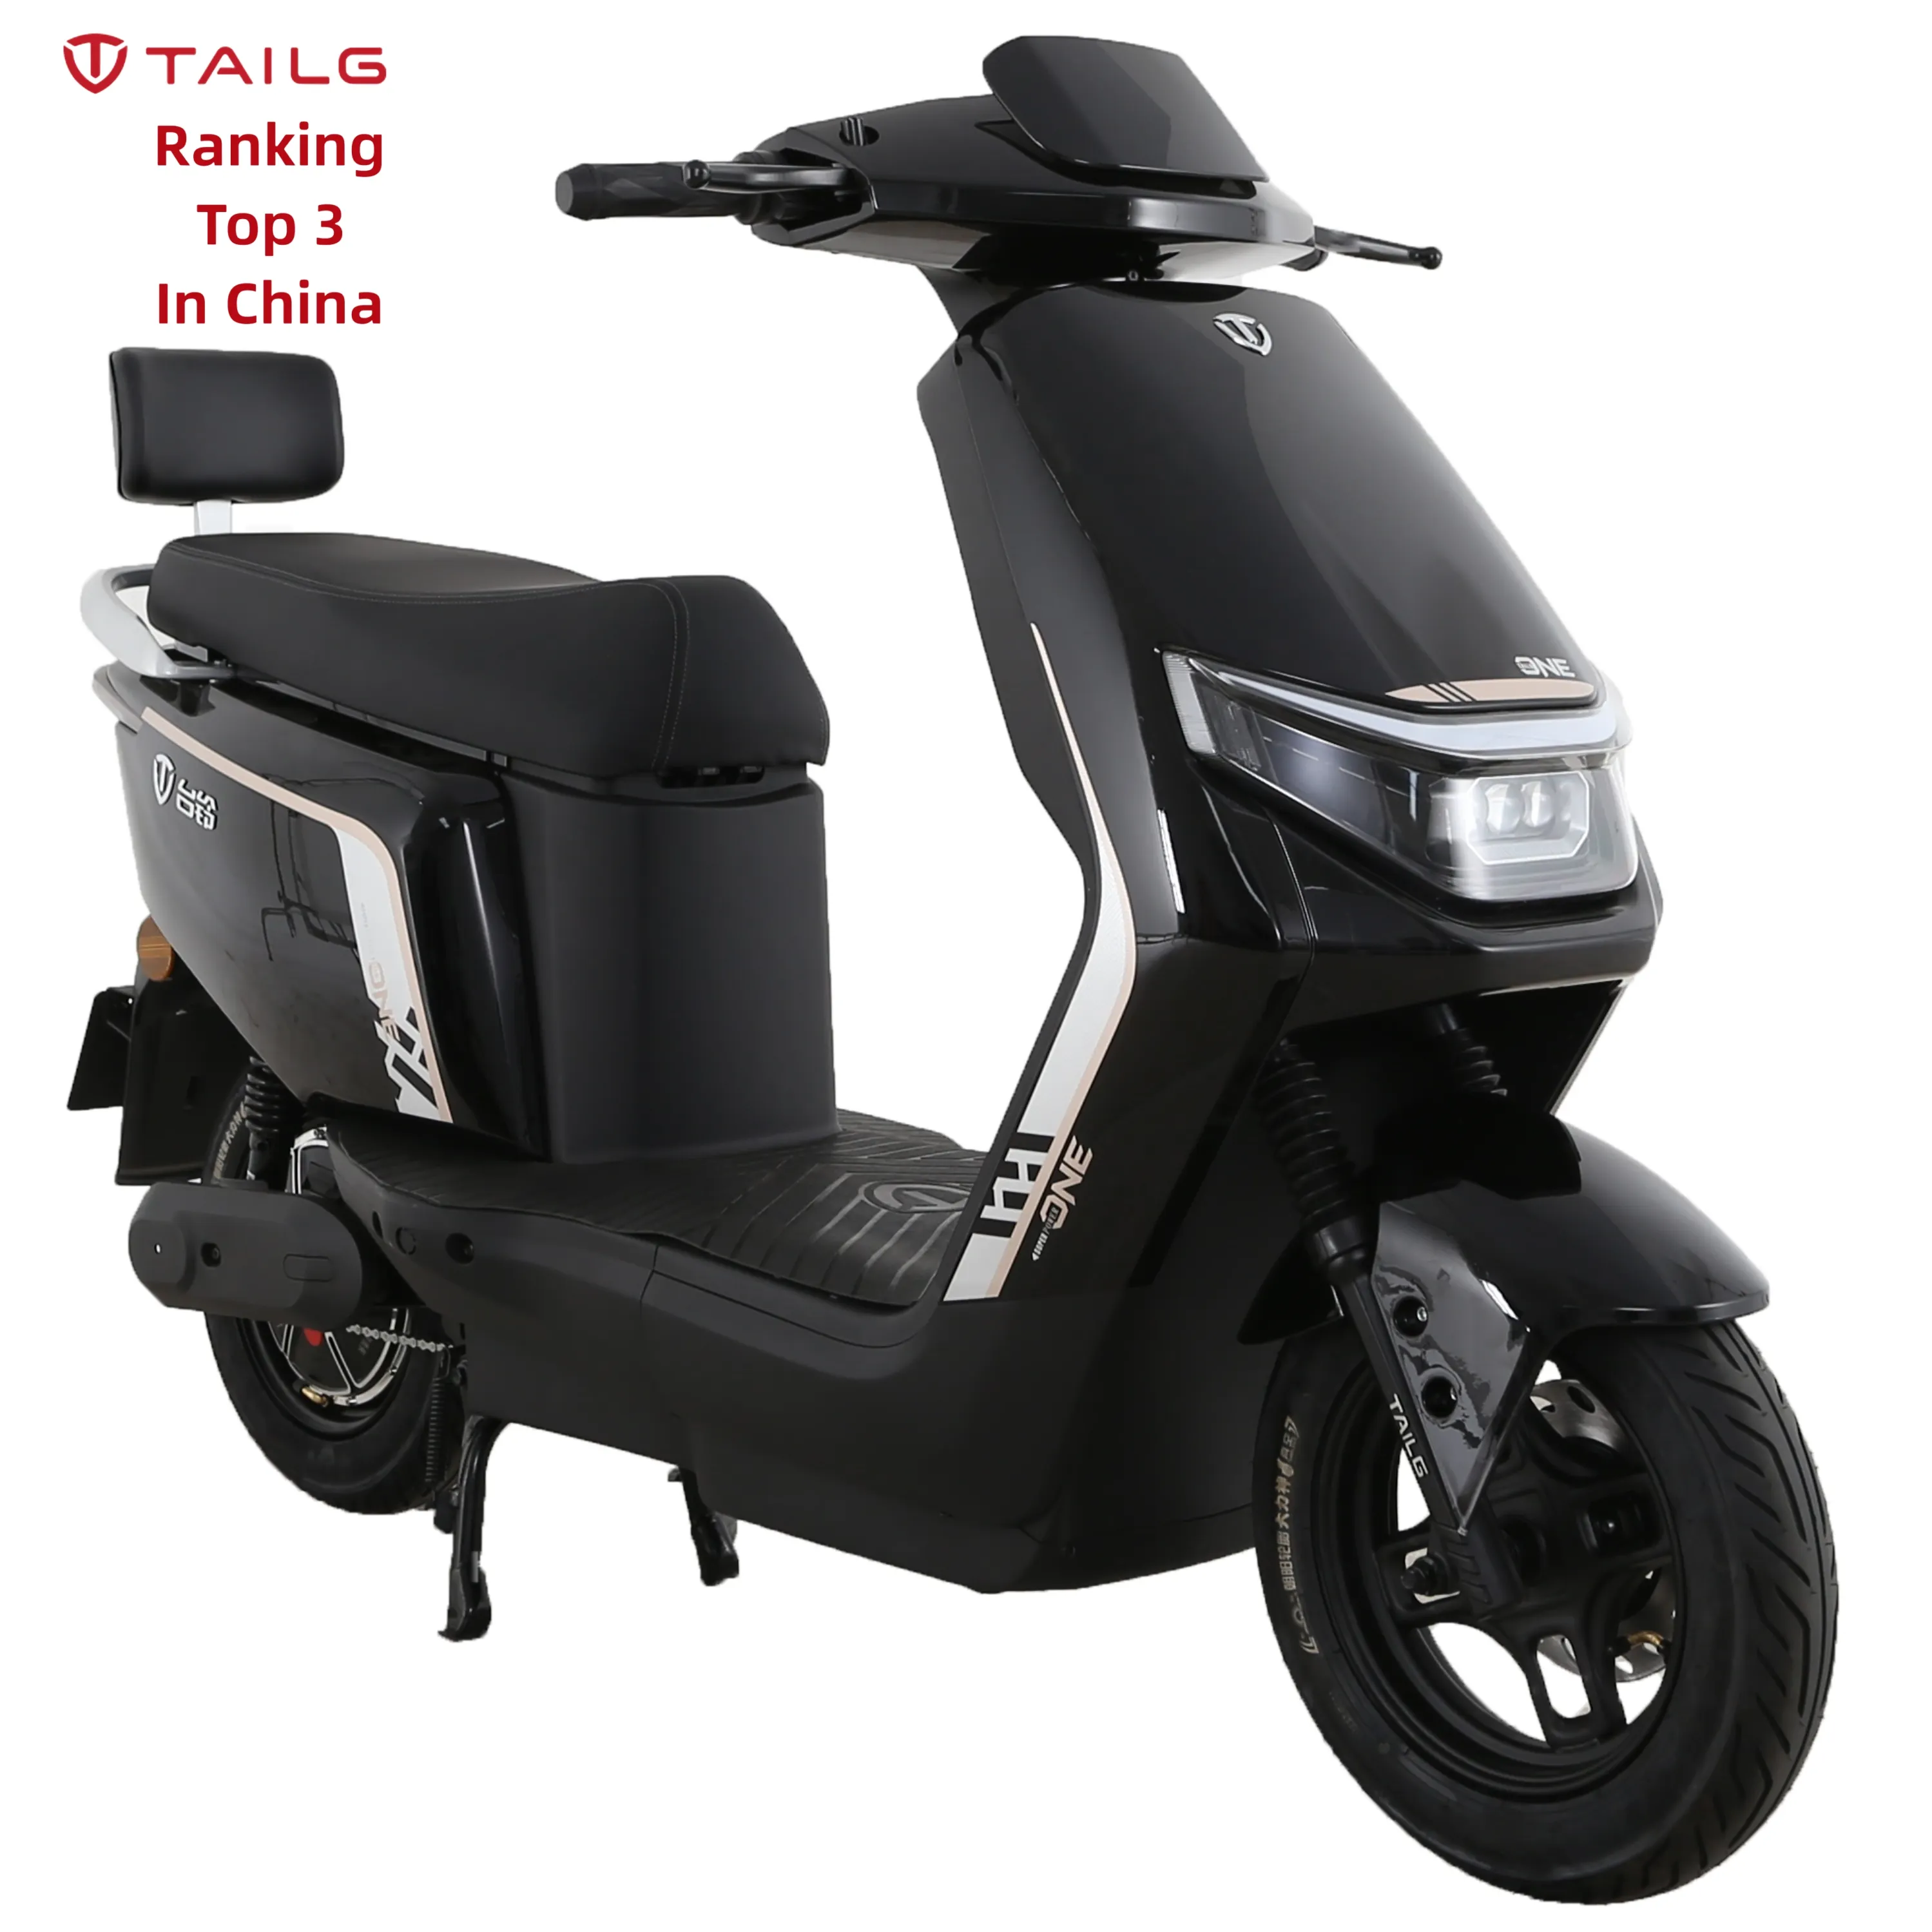 TAILG Chinese Fashion Design 51Km/h High Speed 2 Seats 72 Volt Two Wheels Adult Electric Scooter